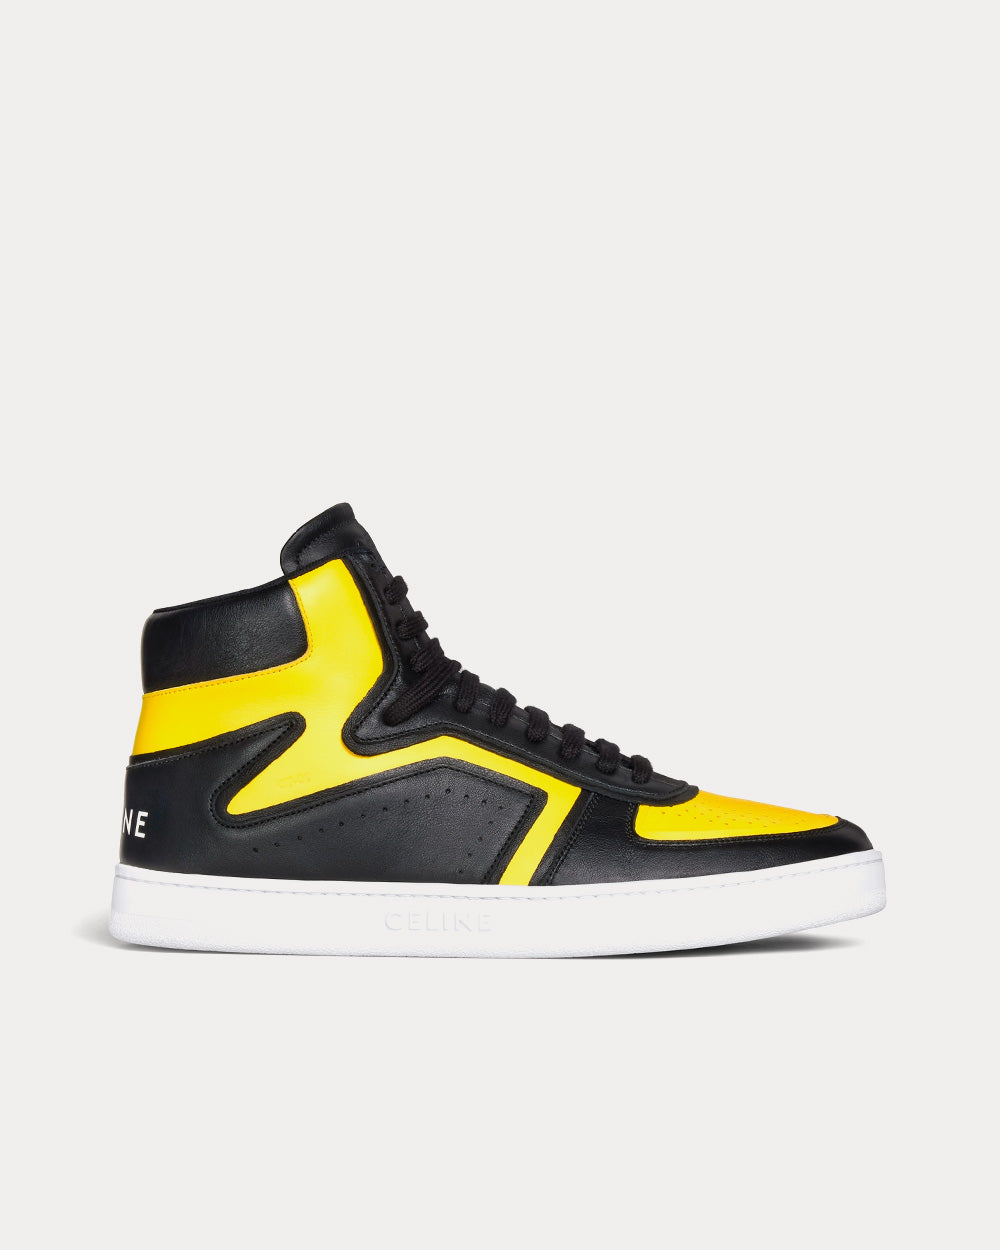 CELINE HOMME Z CT-01 Mesh and Suede High-Top Sneakers for Men